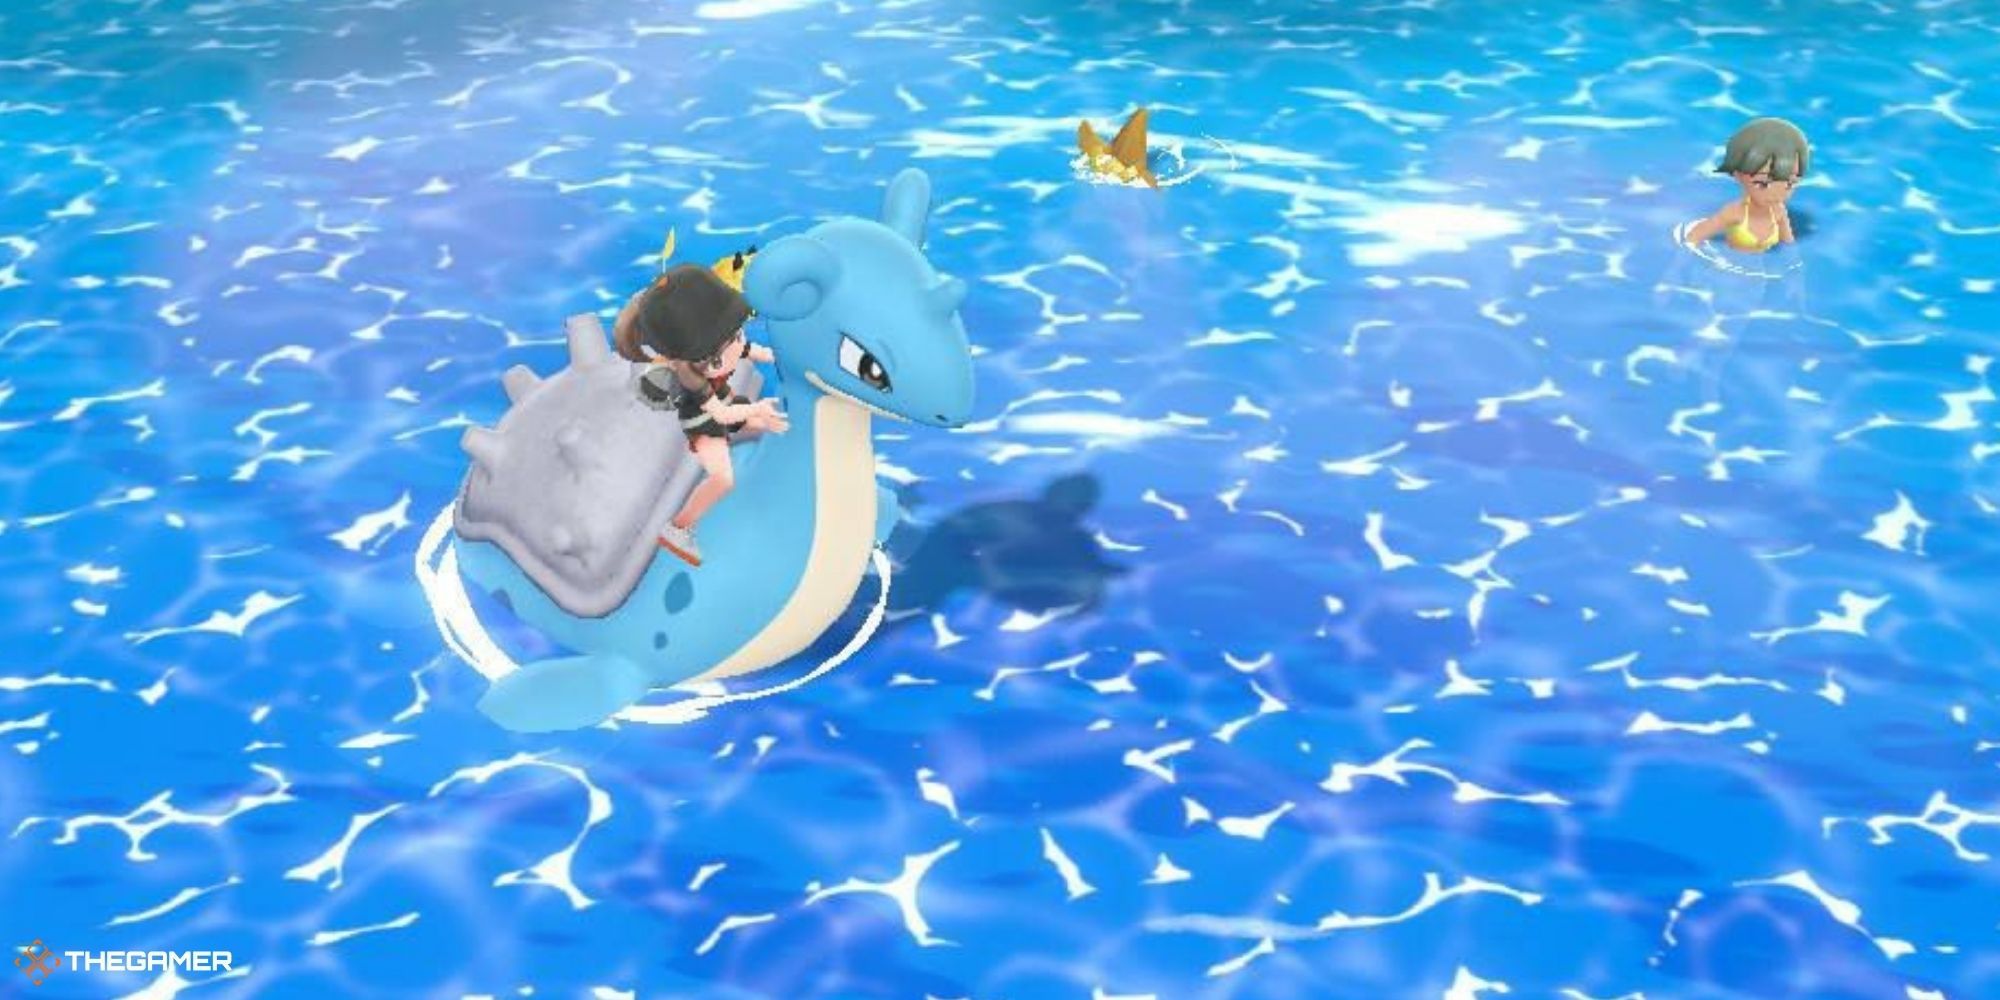 Let's Go Pikachu and Eevee - Lapras carrying player in sea